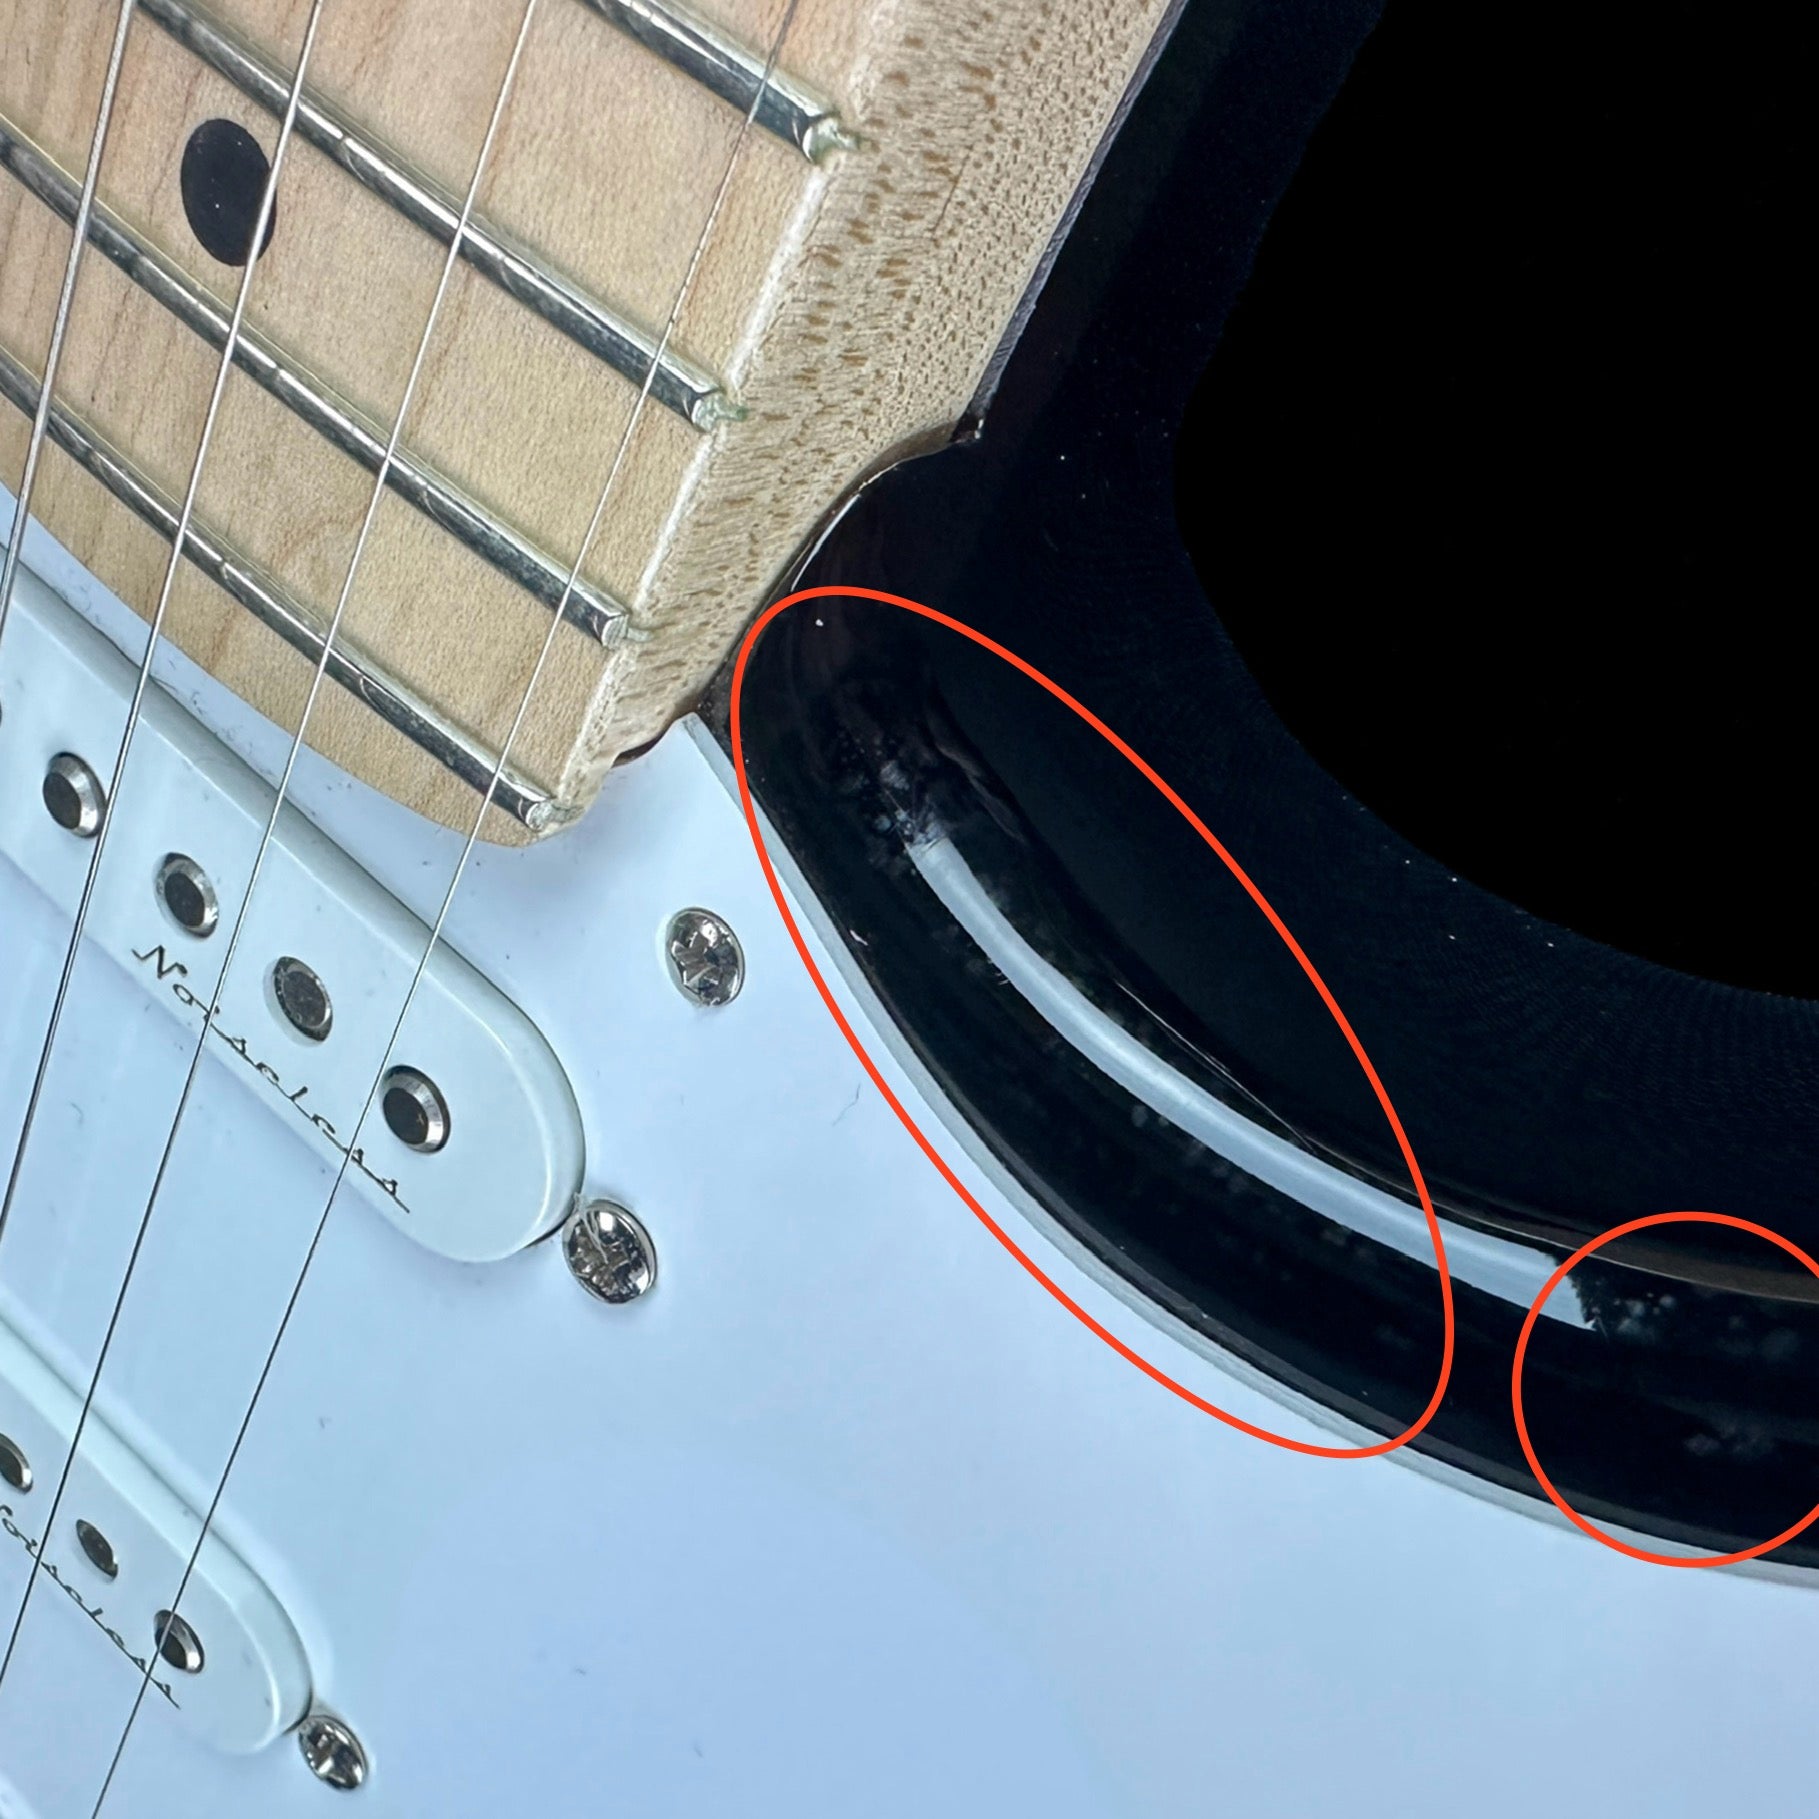 Marks near neck joint of Used Fender Eric Clapton "Blackie" Strat.